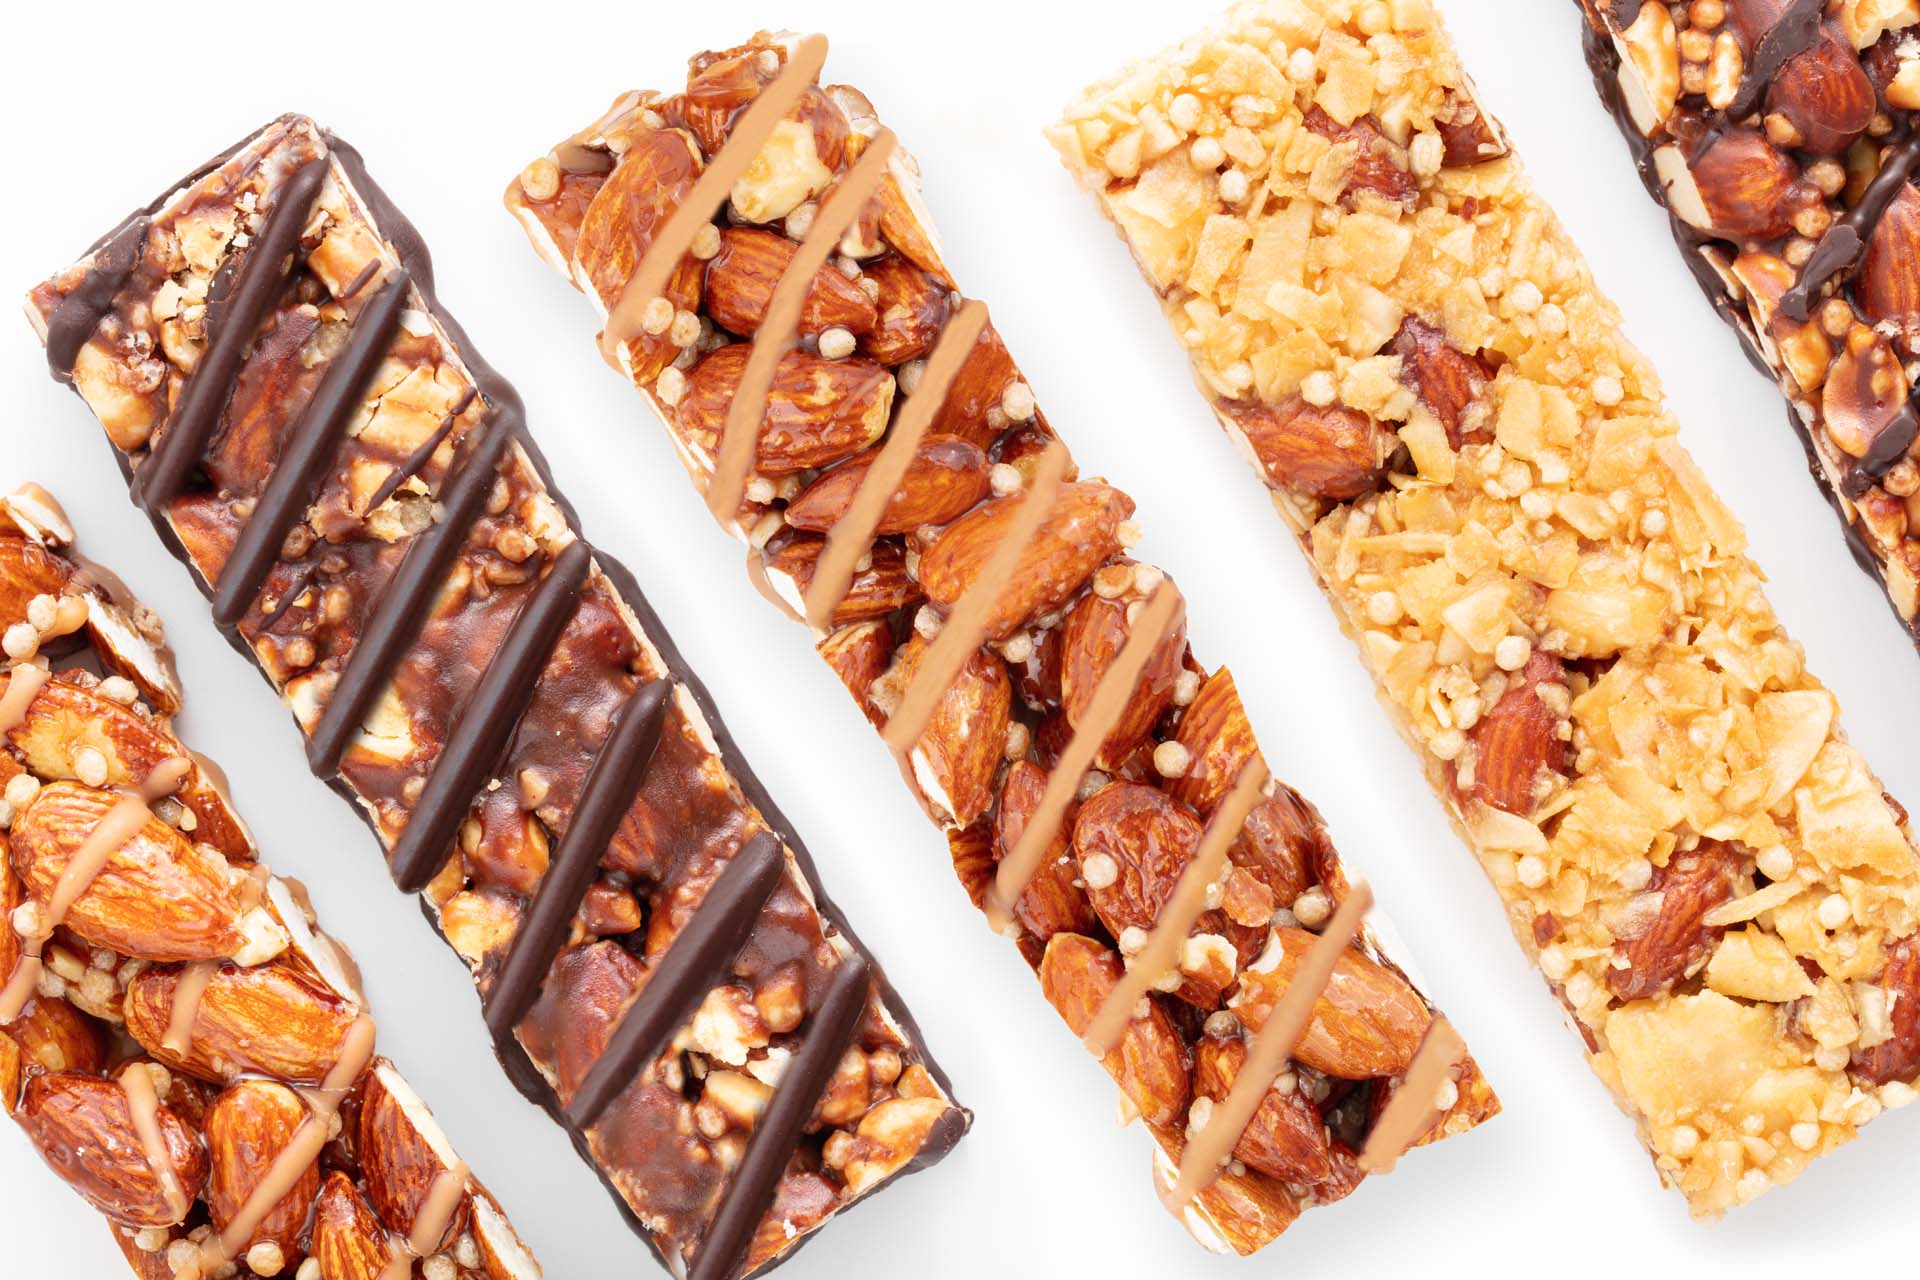 Assortment of Energy, Health and Breakfast Bars made with Whole Almonds